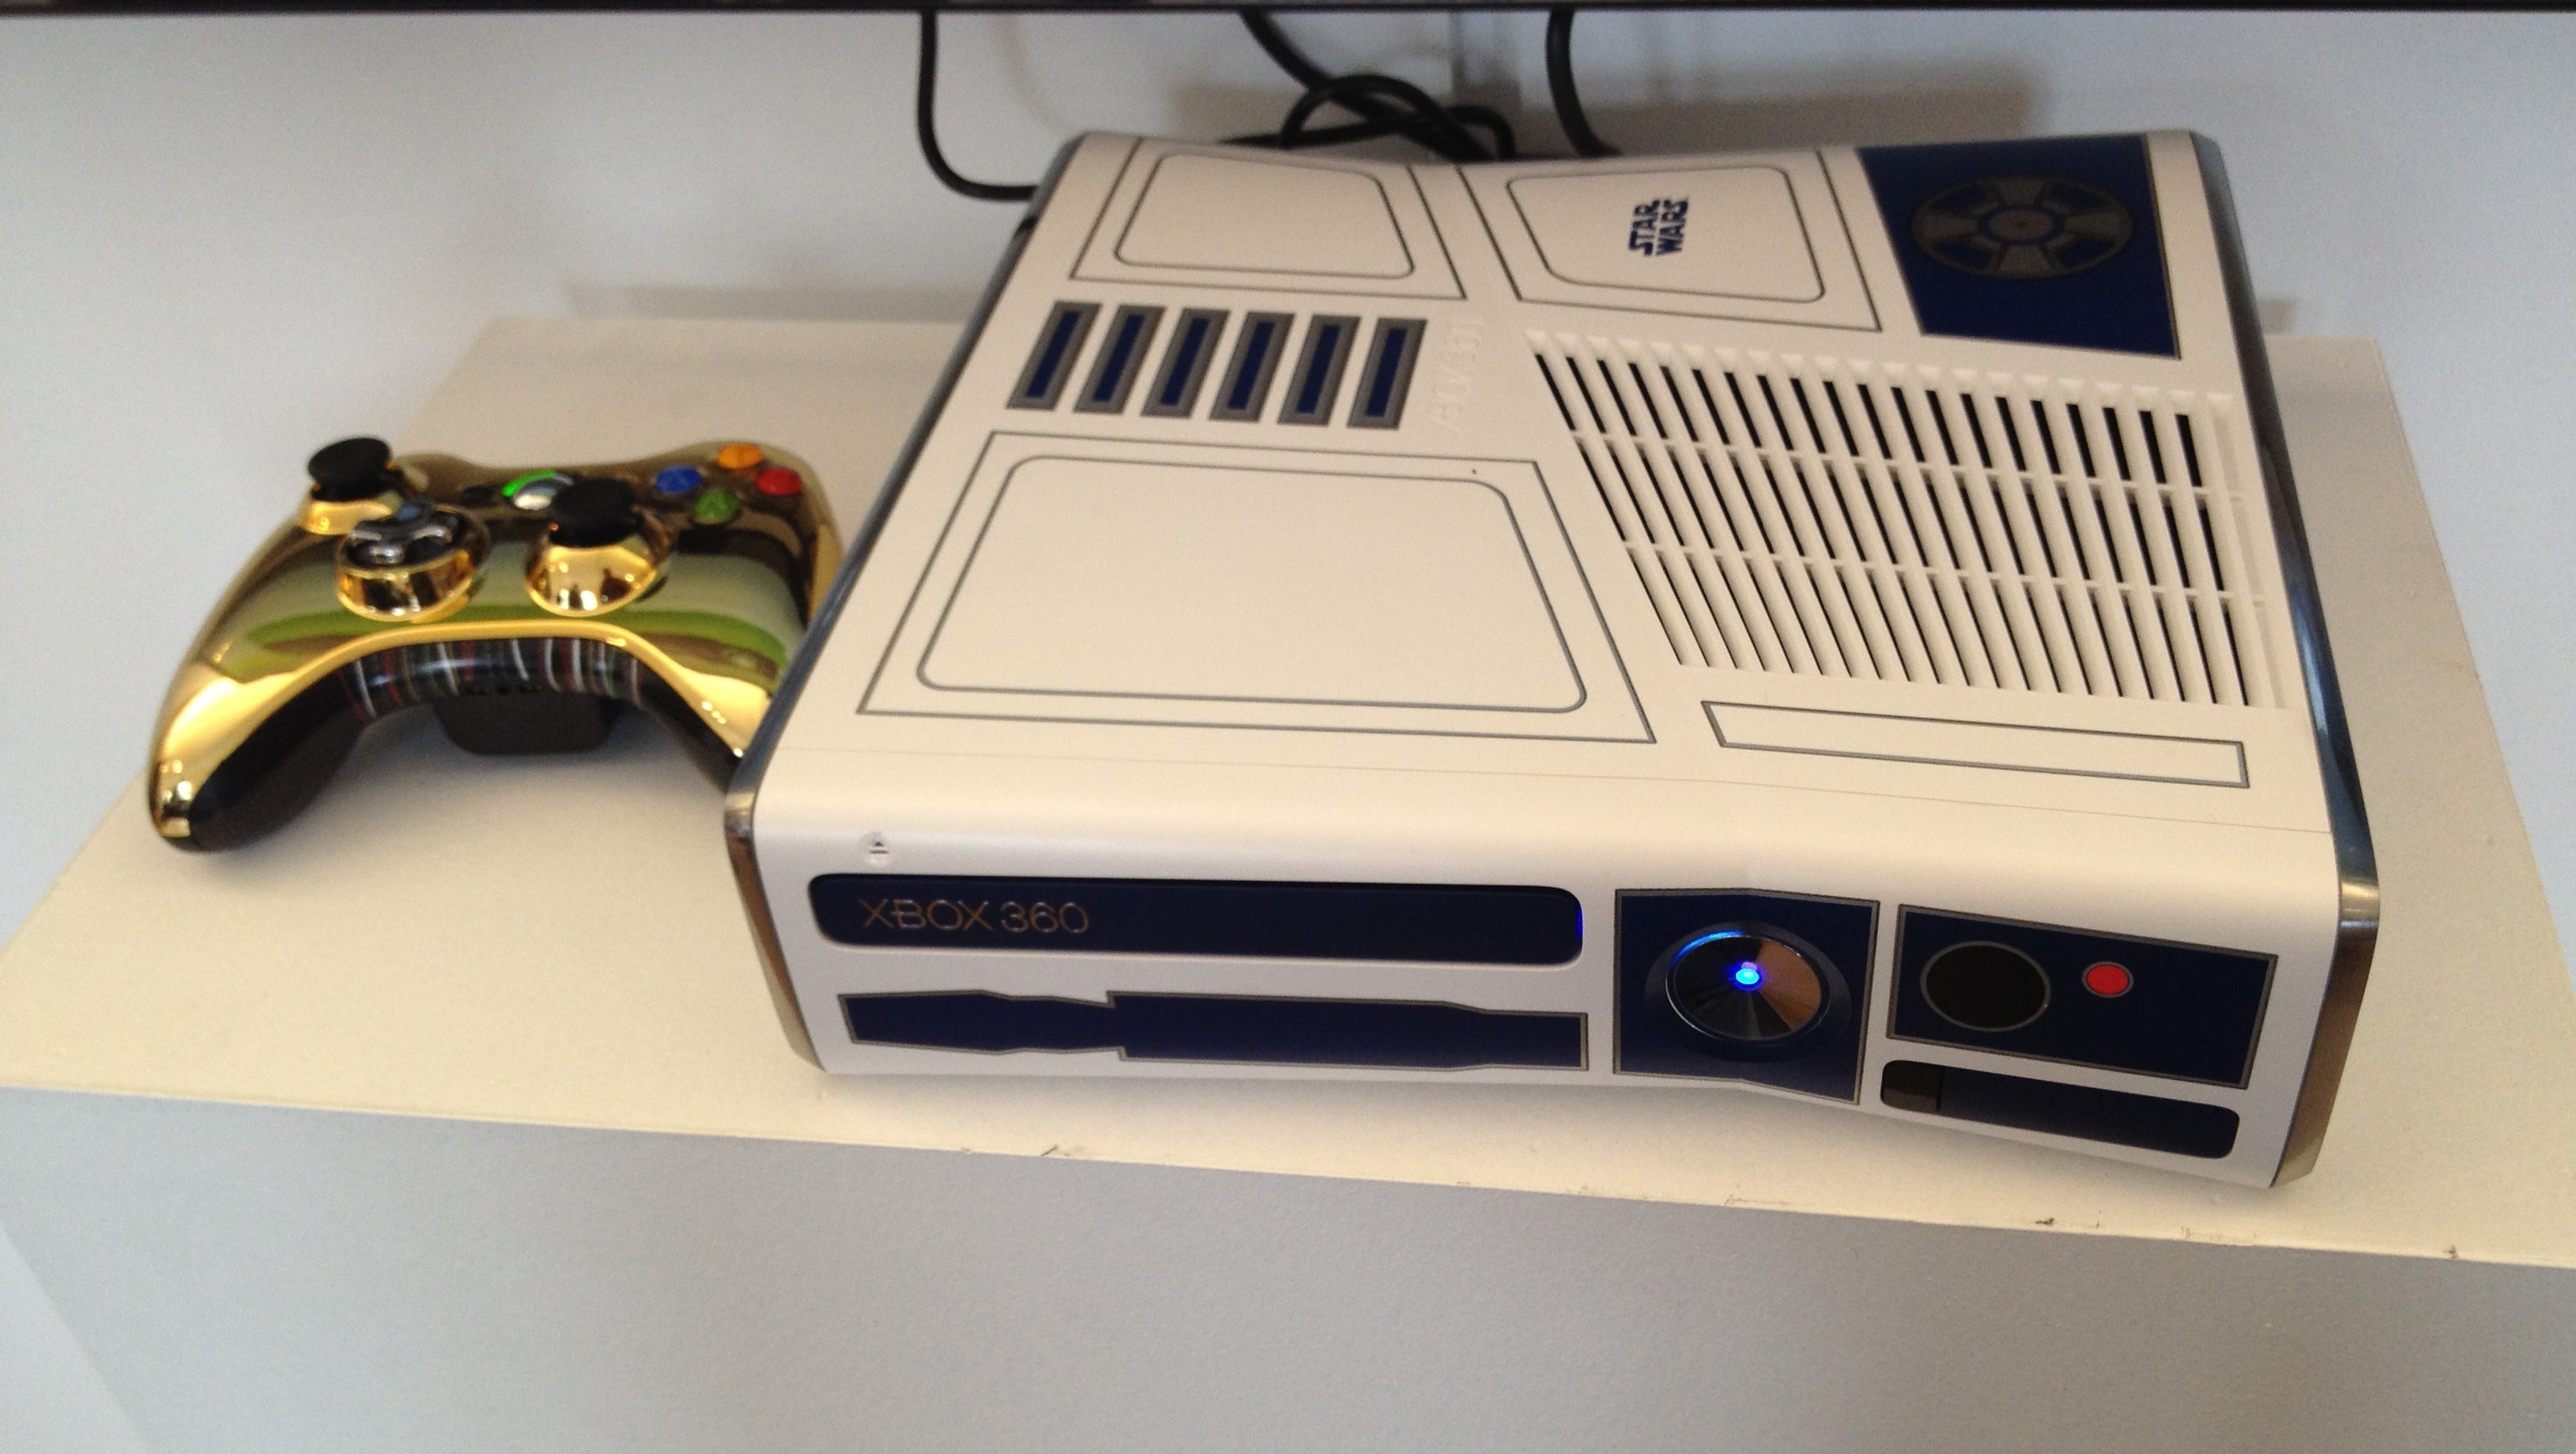 Star Wars Xbox 360 Spotted on TV Set, Rumored April Release